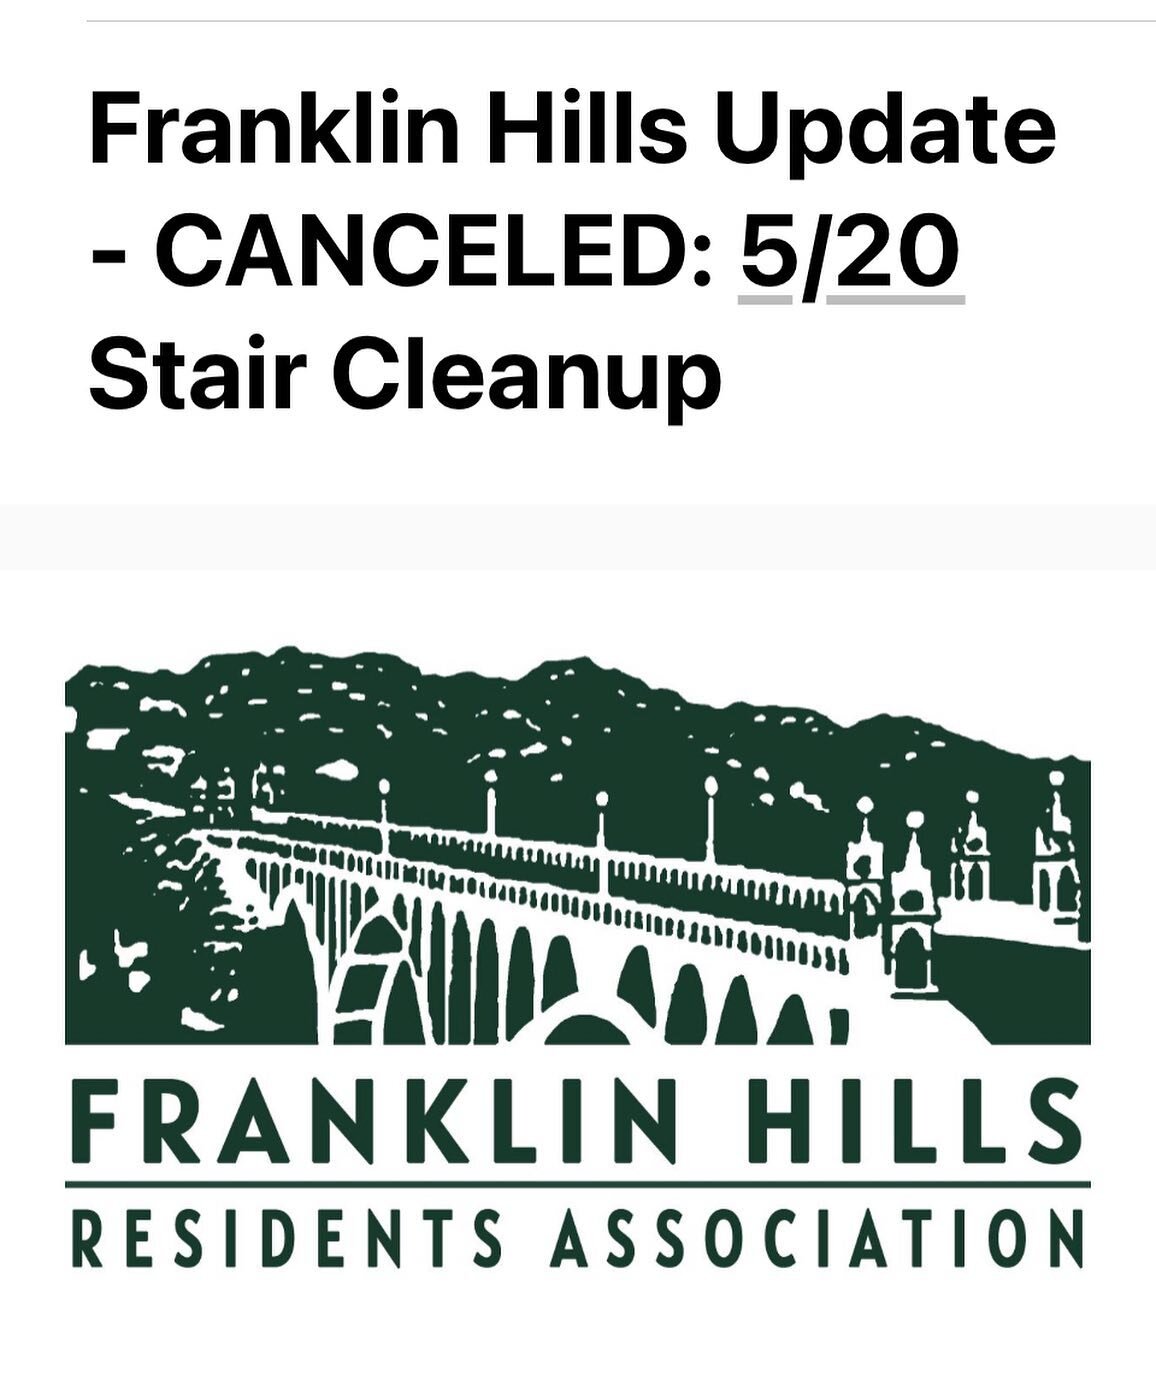 Sorry for the late notice but due to a scheduling mix up tomorrow&rsquo;s clean up has been cancelled.